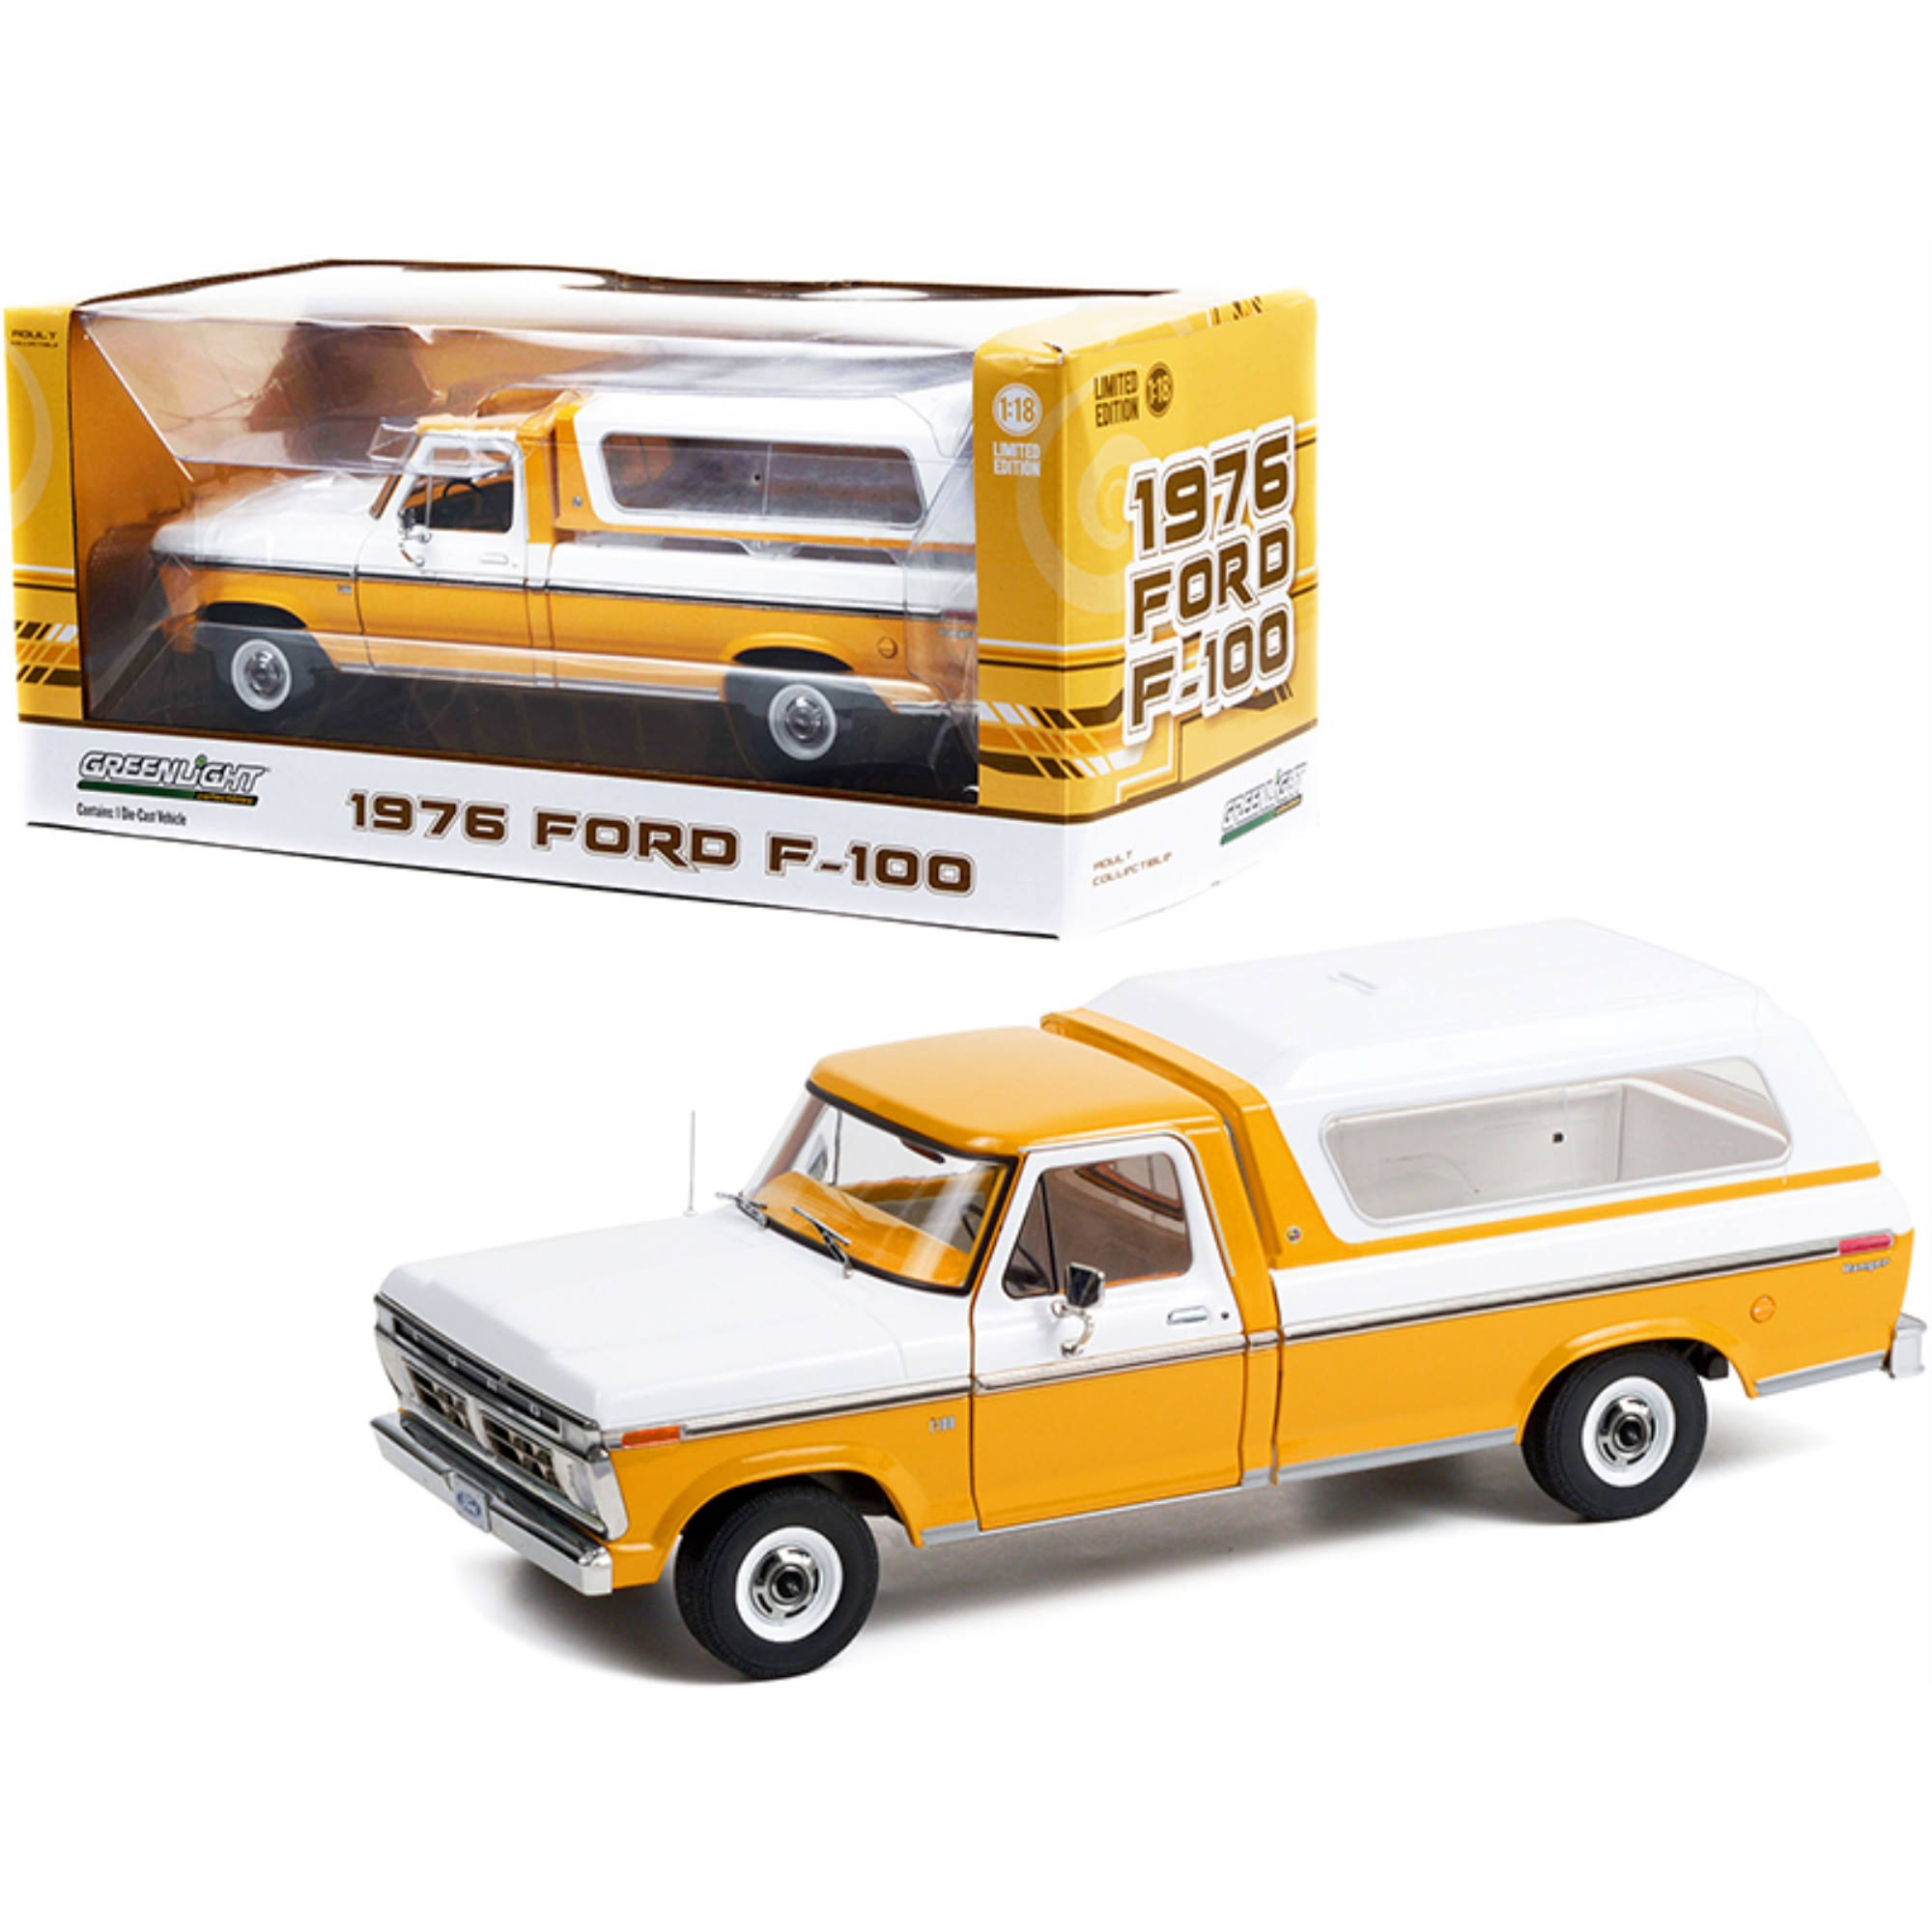 1976 Ford F-100 Ranger Pickup Truck with Deluxe Box Cover Chrome Yellow and Wimbledon White 1/18 di by Greenlight